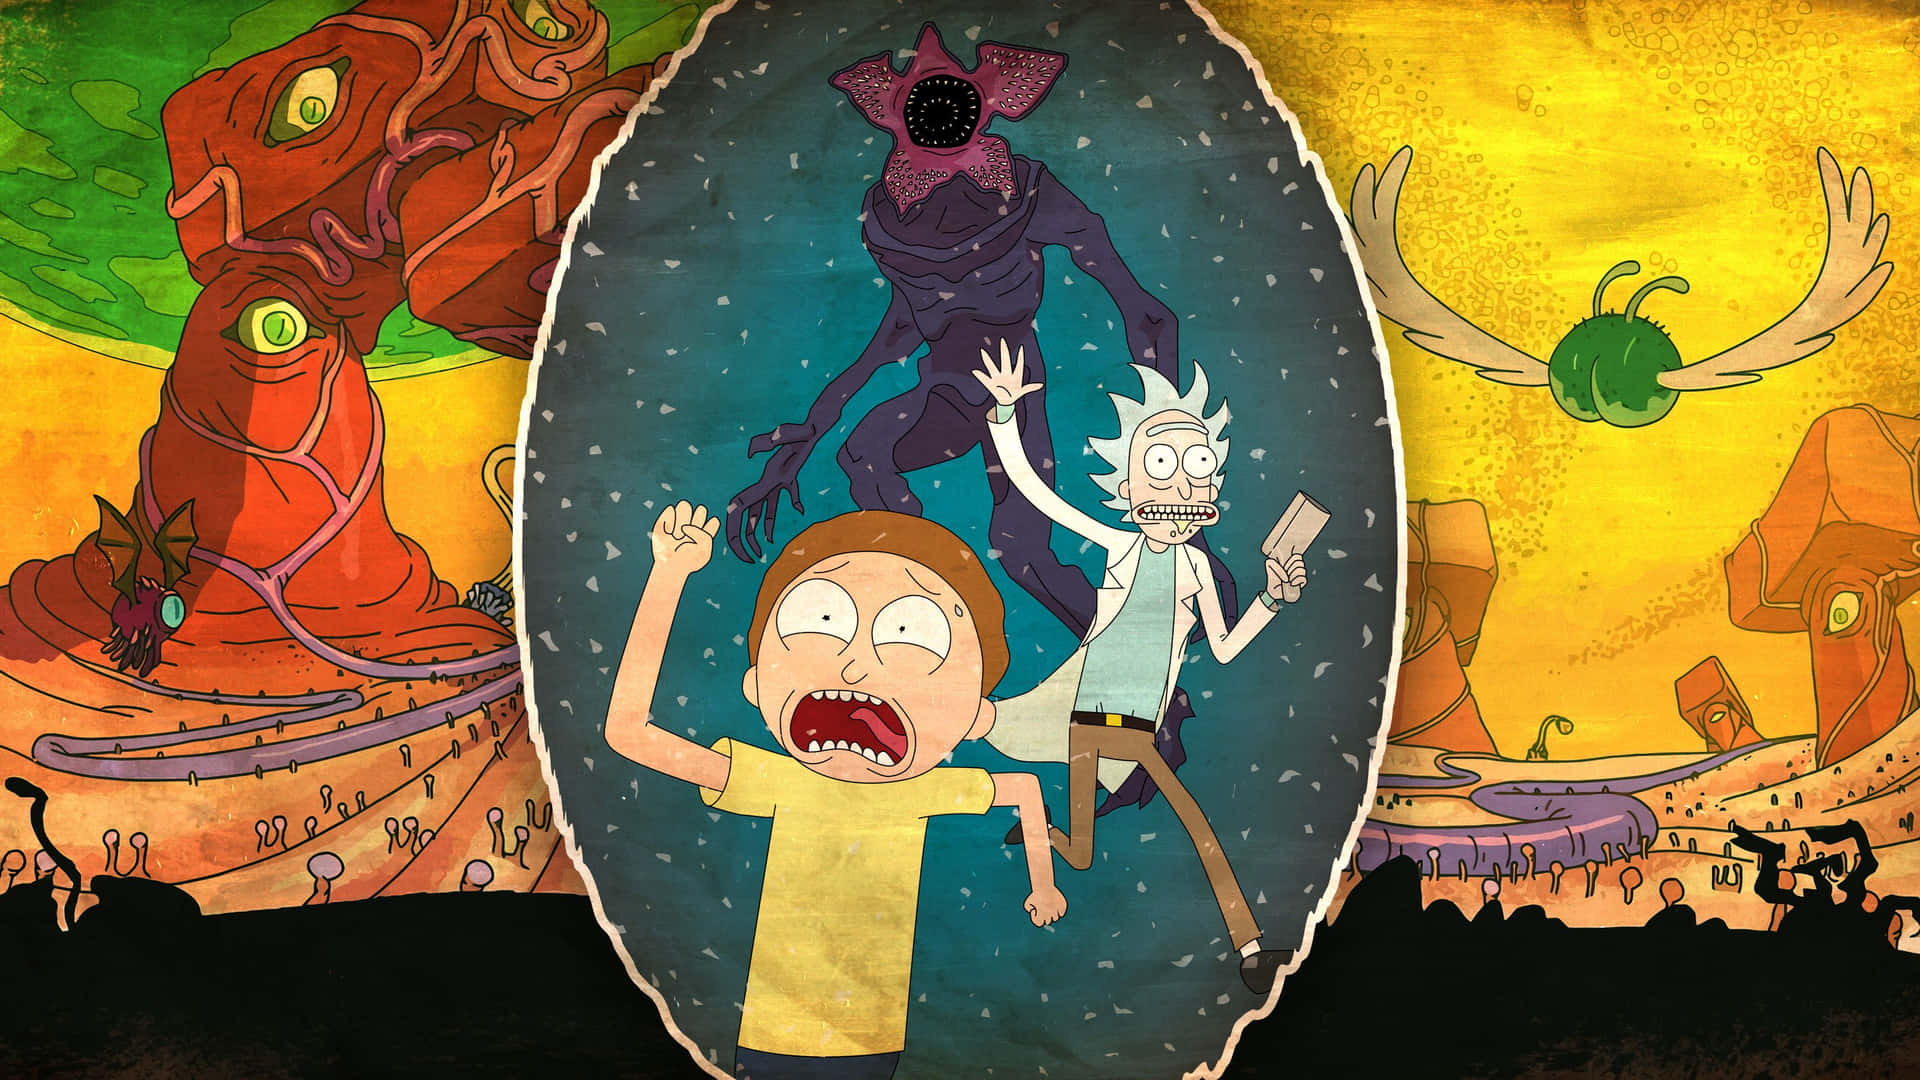 Rick and Morty join together for a wild ride